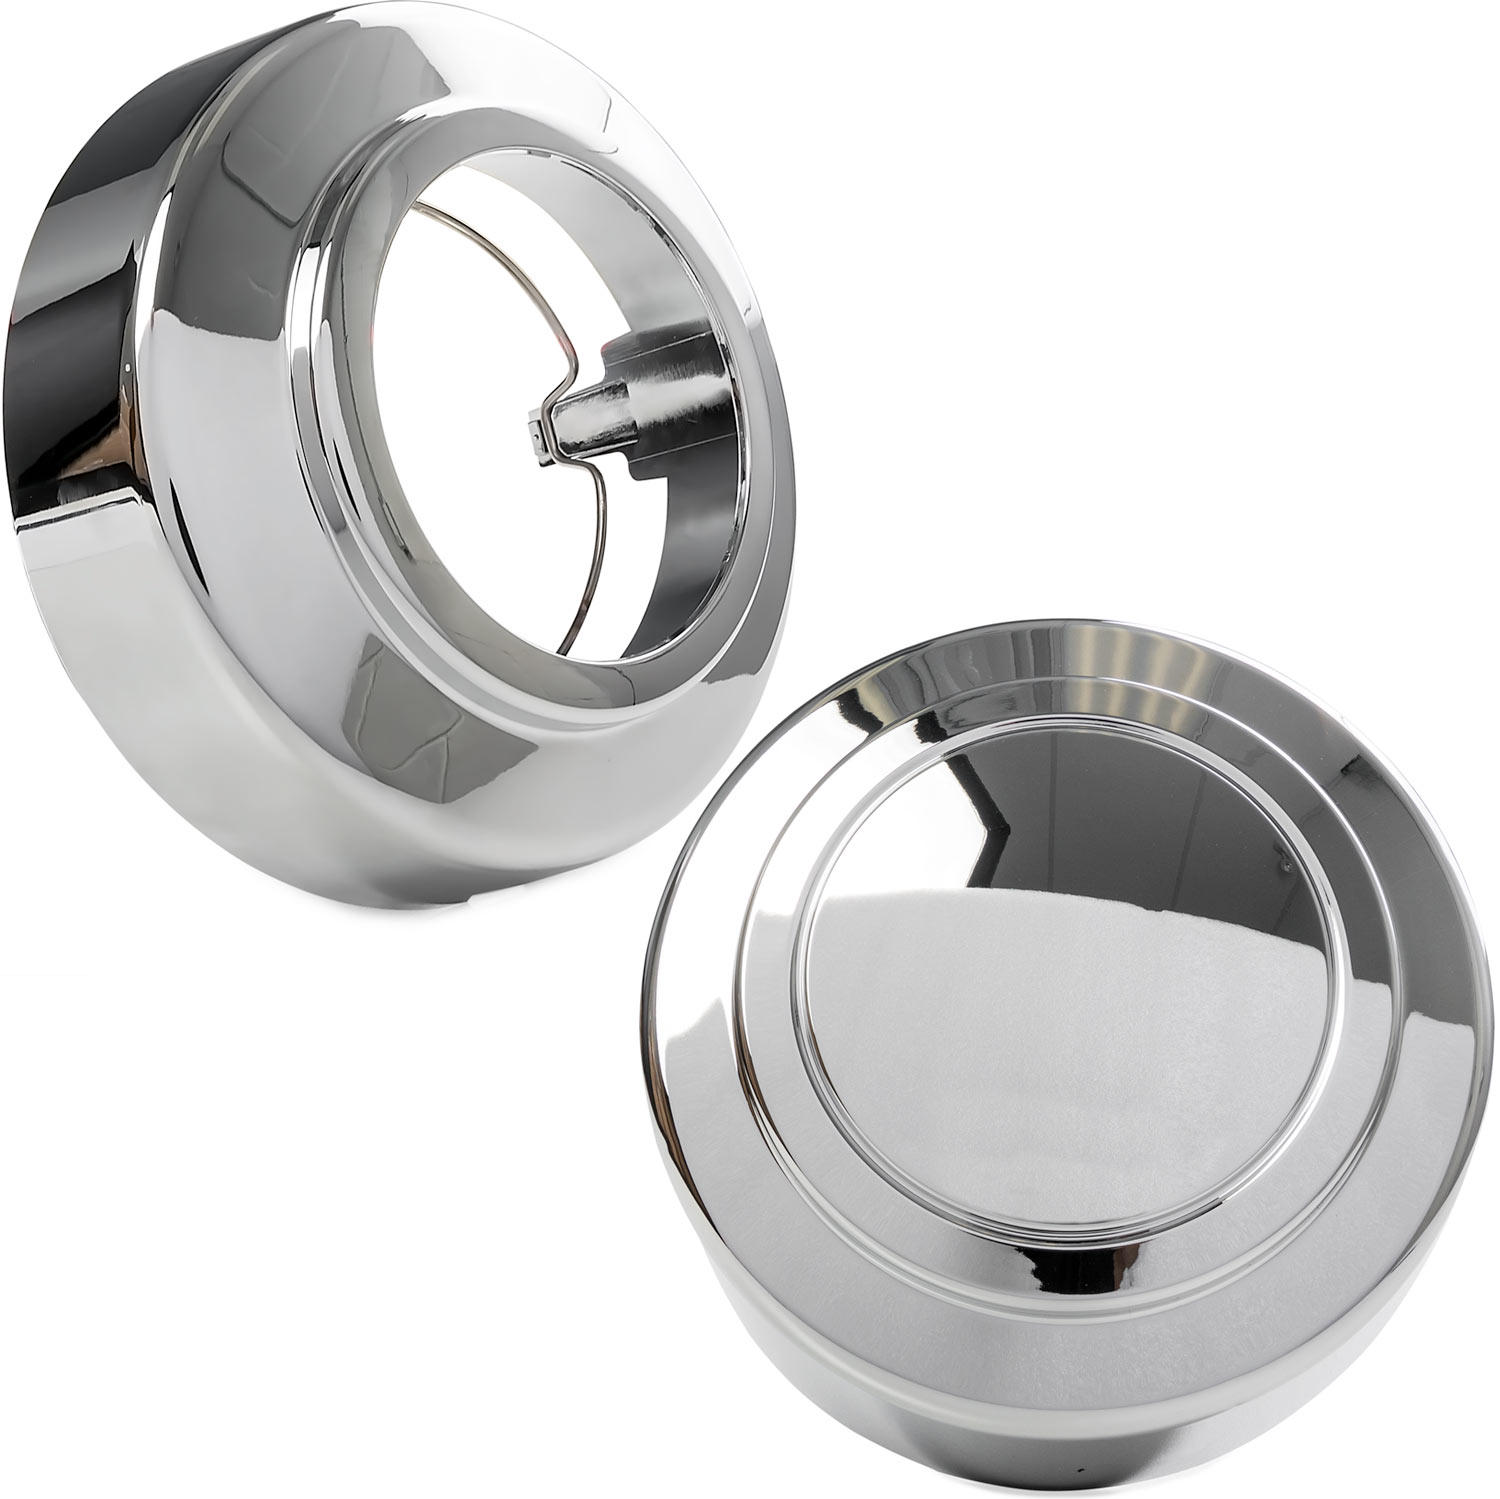 Krator 4x Chrome Center Caps Open and Closed Wheel Lug Nut Hub Cap Covers Compatible with 1995-2008 Ford E-250 Van